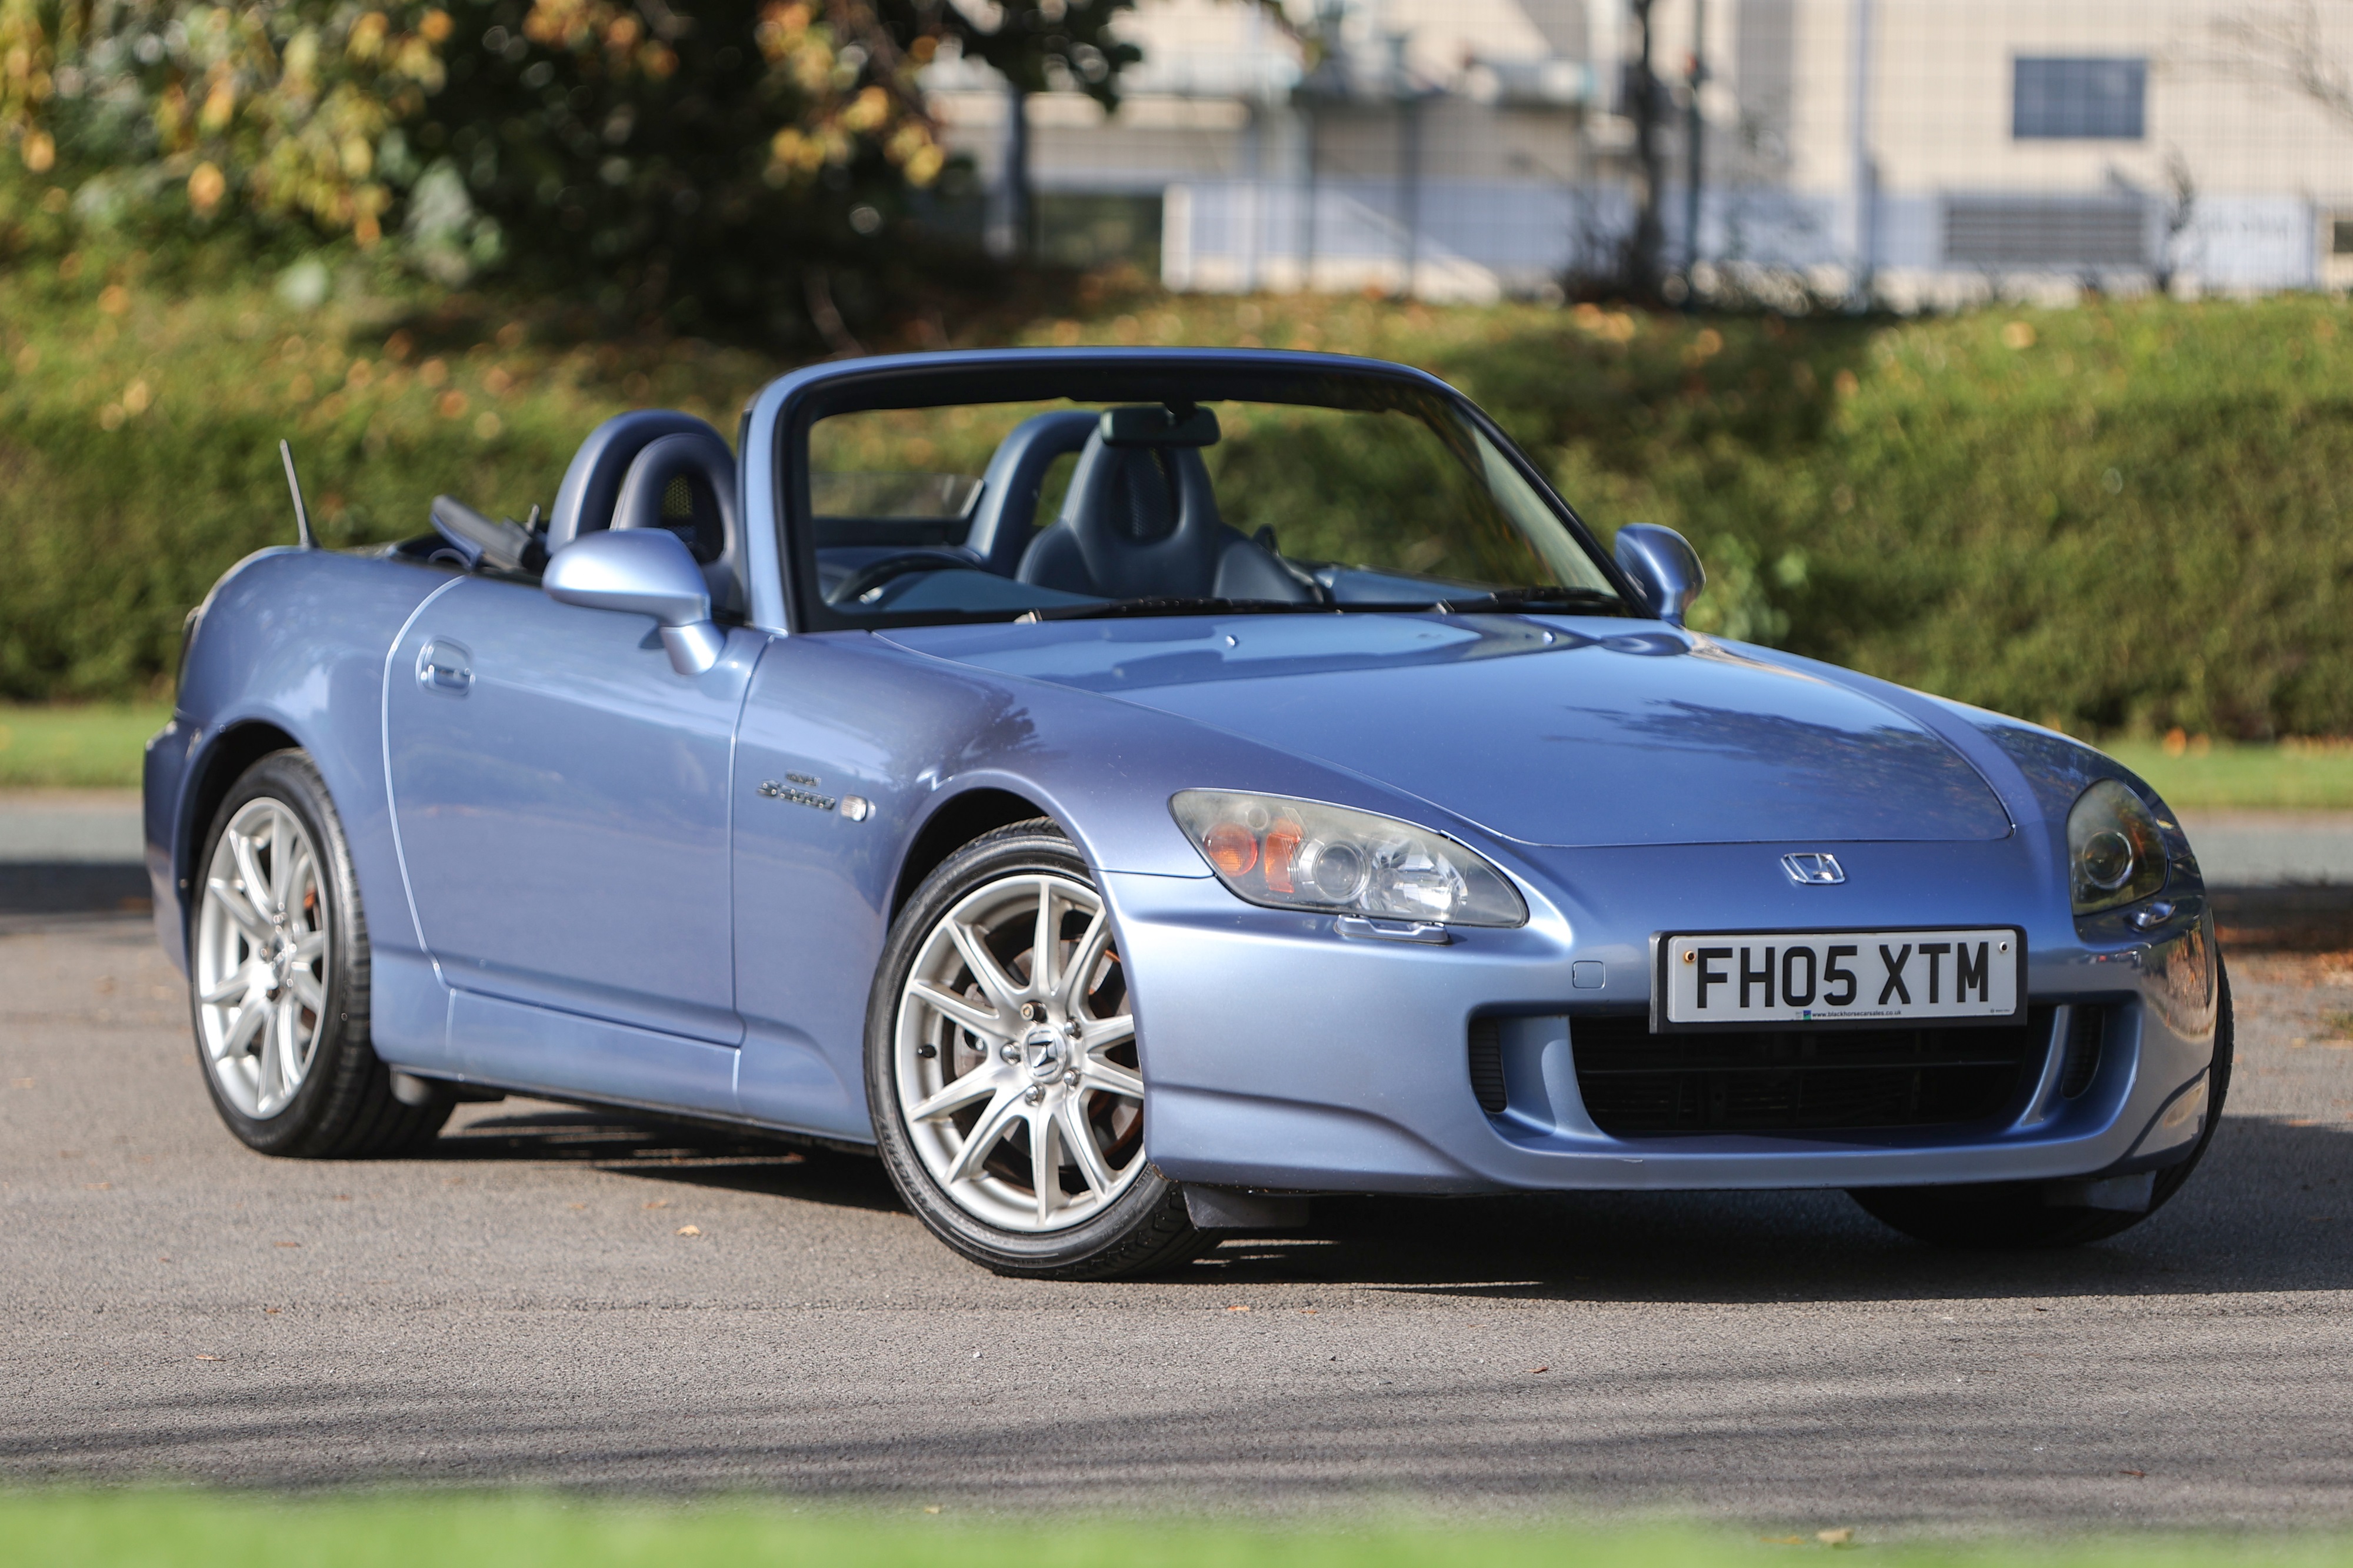 How Big Is Too Big to Fit Comfortably in an S2000?